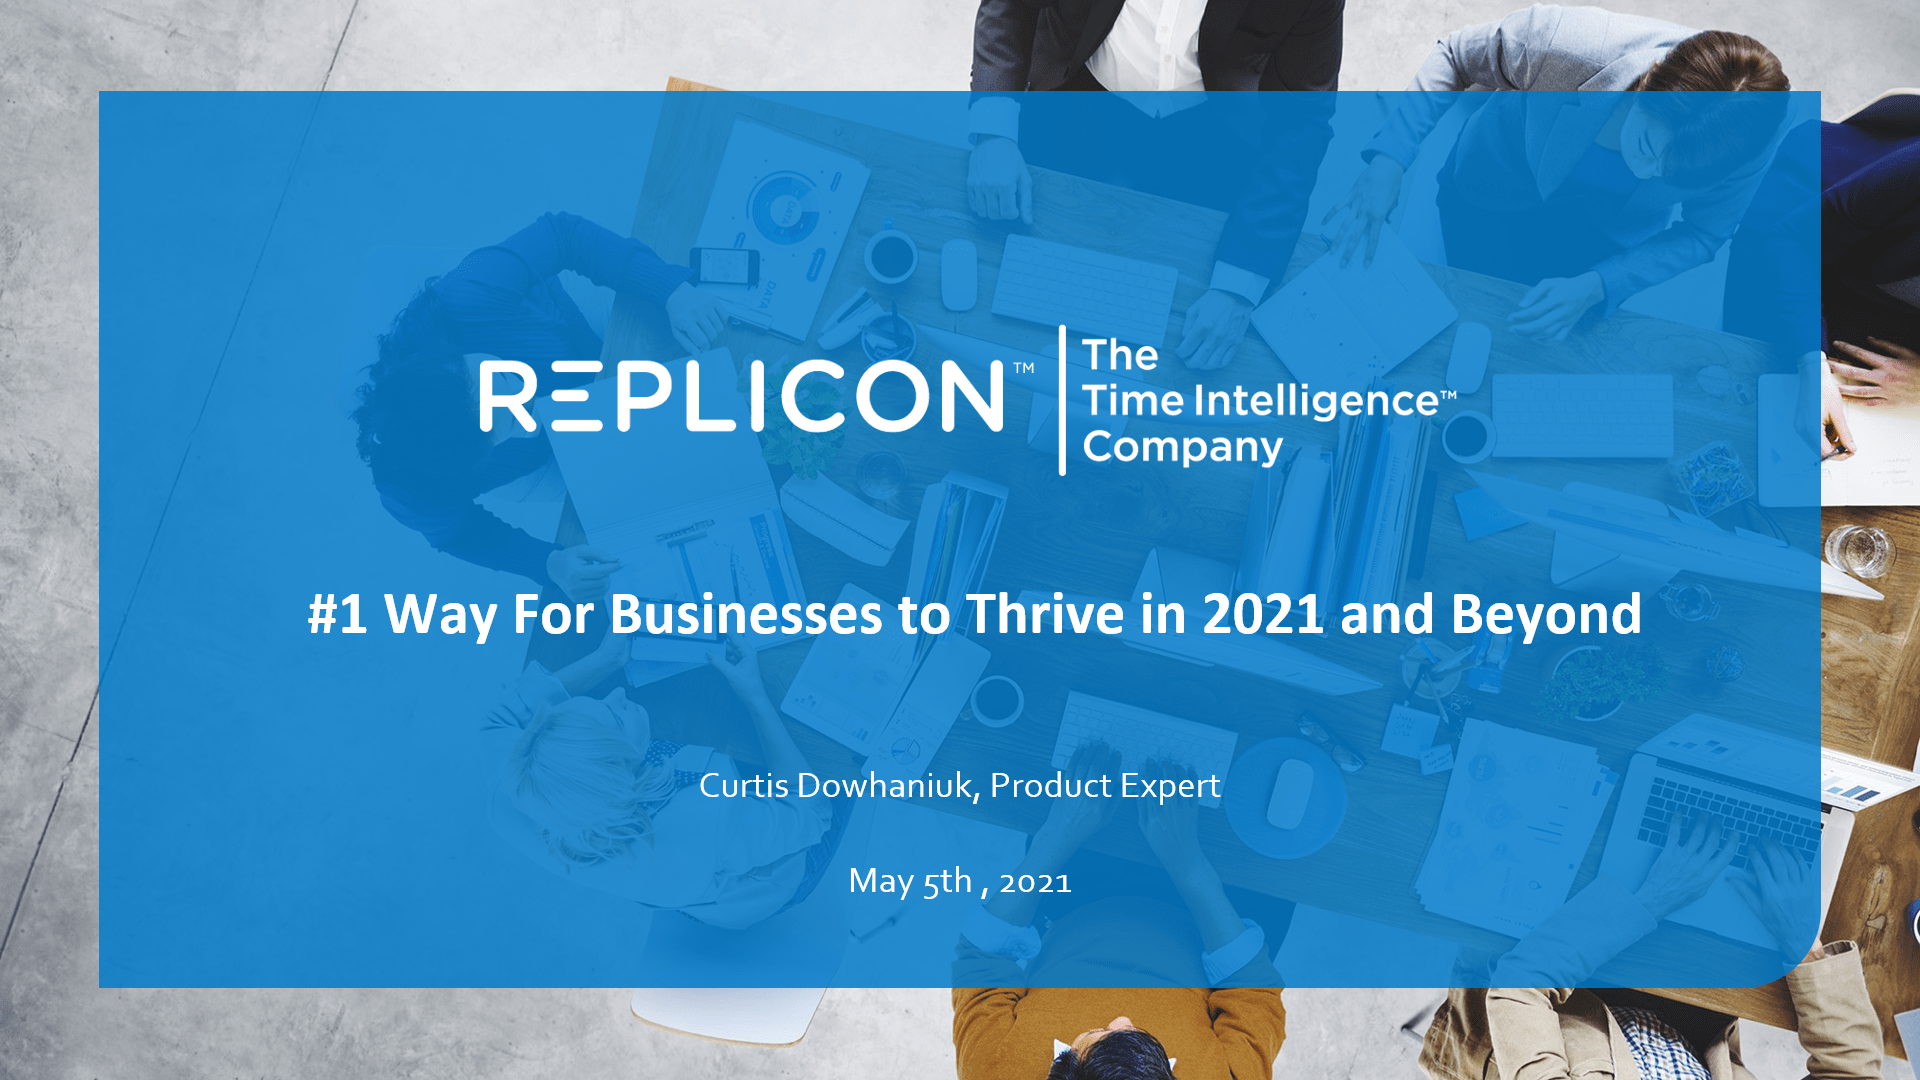 #1 Way for Businesses to Thrive in 2021 and Beyond